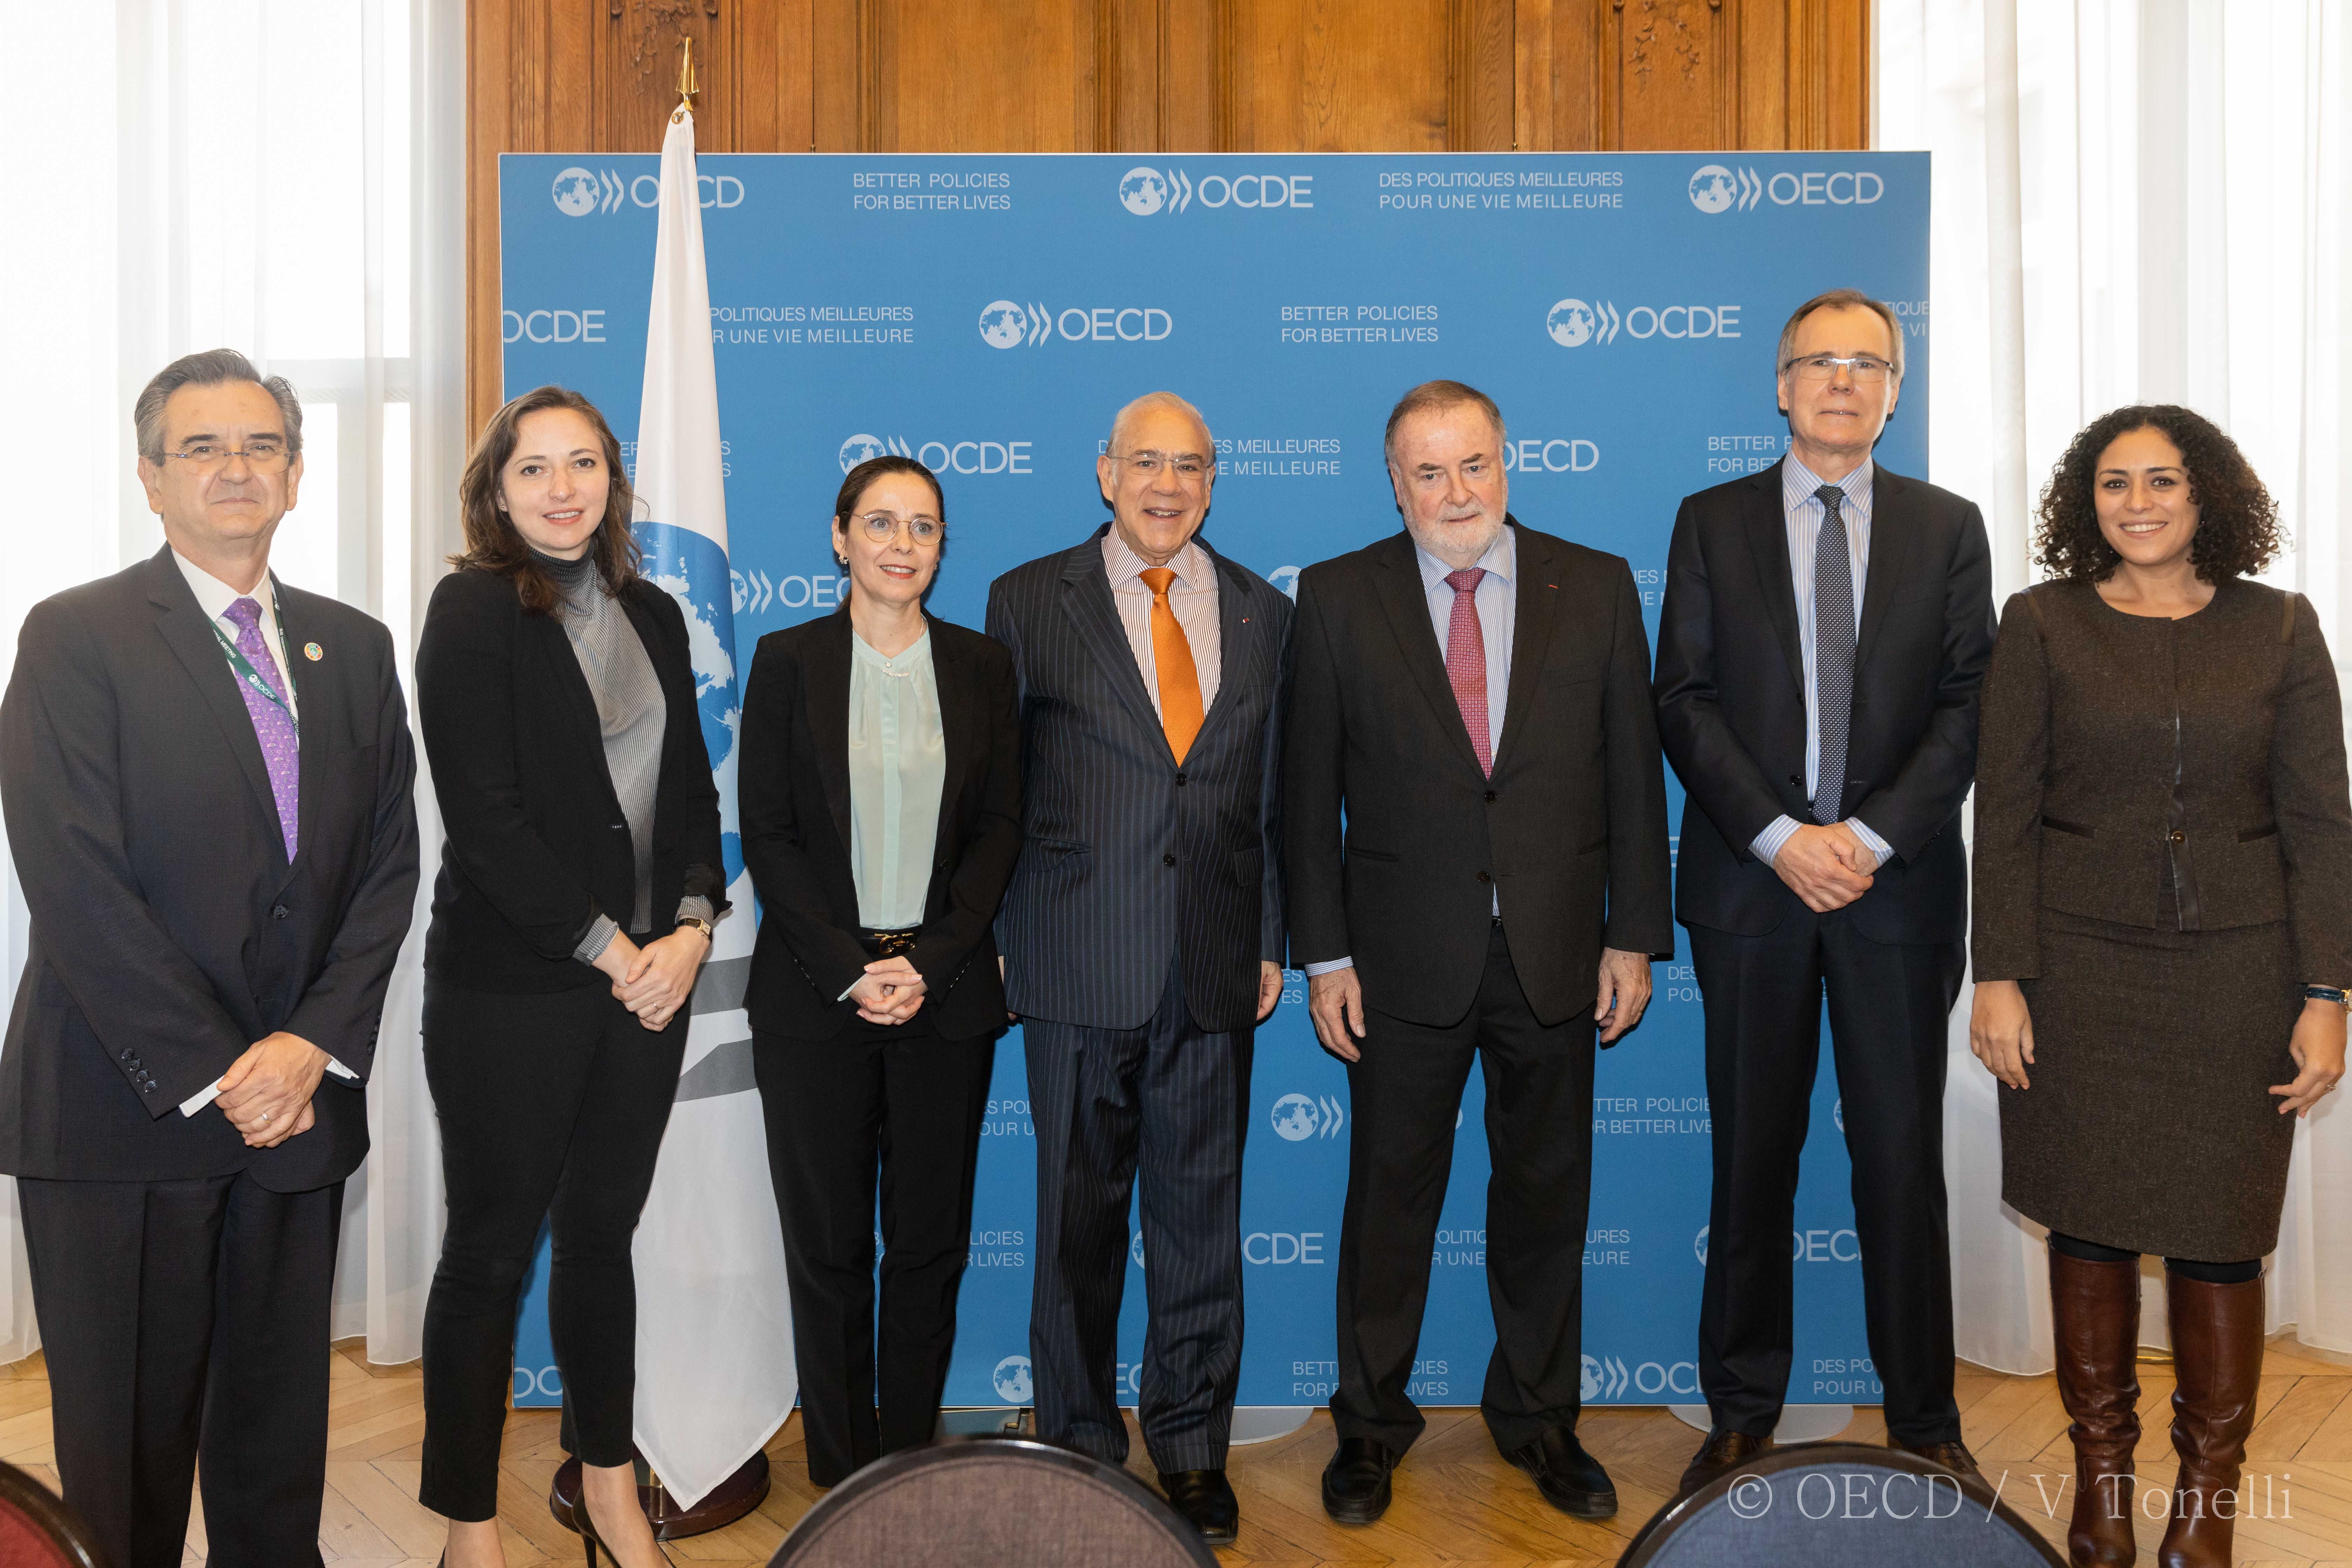 Loïc Fauchon, President of the World Water Council and Jose Angel Gurria Trevino, Secretary General of the OECD (third and fourth from right), OECD Headquarters, Paris, 22 March 2019 